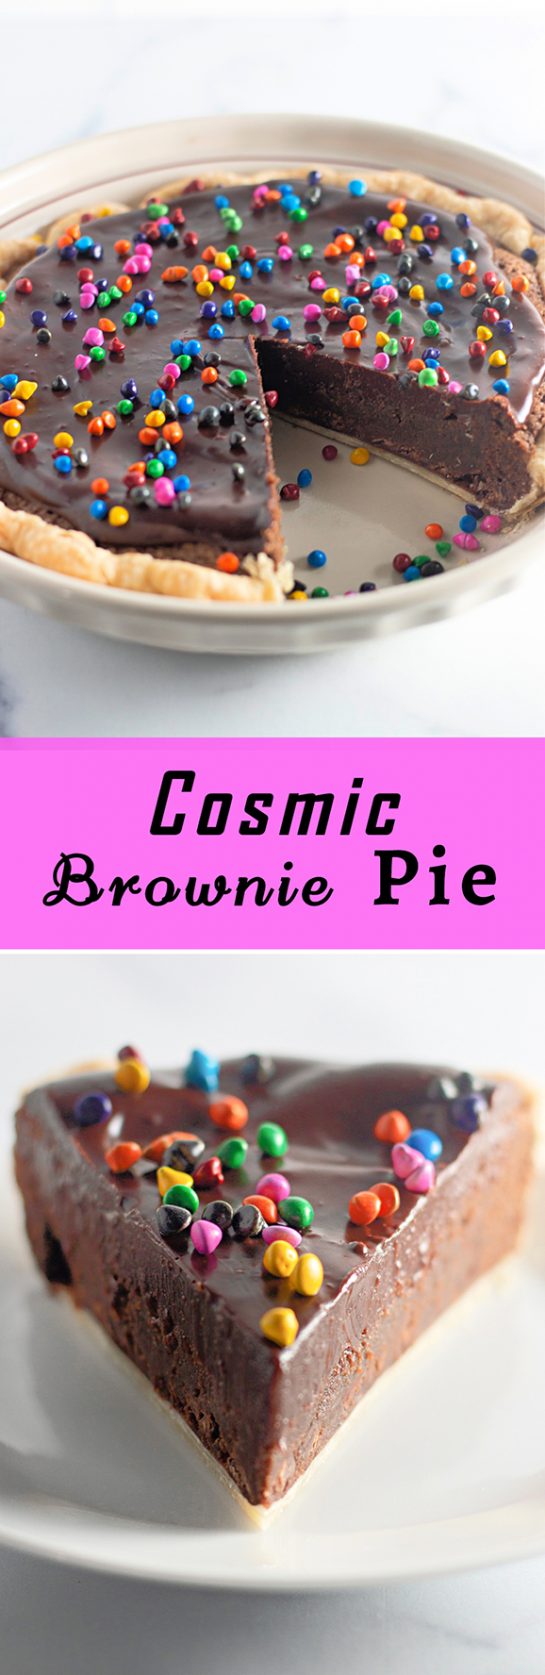 Cosmic Brownie Pie recipe is a slice of heaven. This pie is decadent and don’t forget a glass of cold milk or vanilla ice cream to top it off! Cosmic Brownie Pie is true dessert nirvana with its flakey and buttery crust and fudgy center.